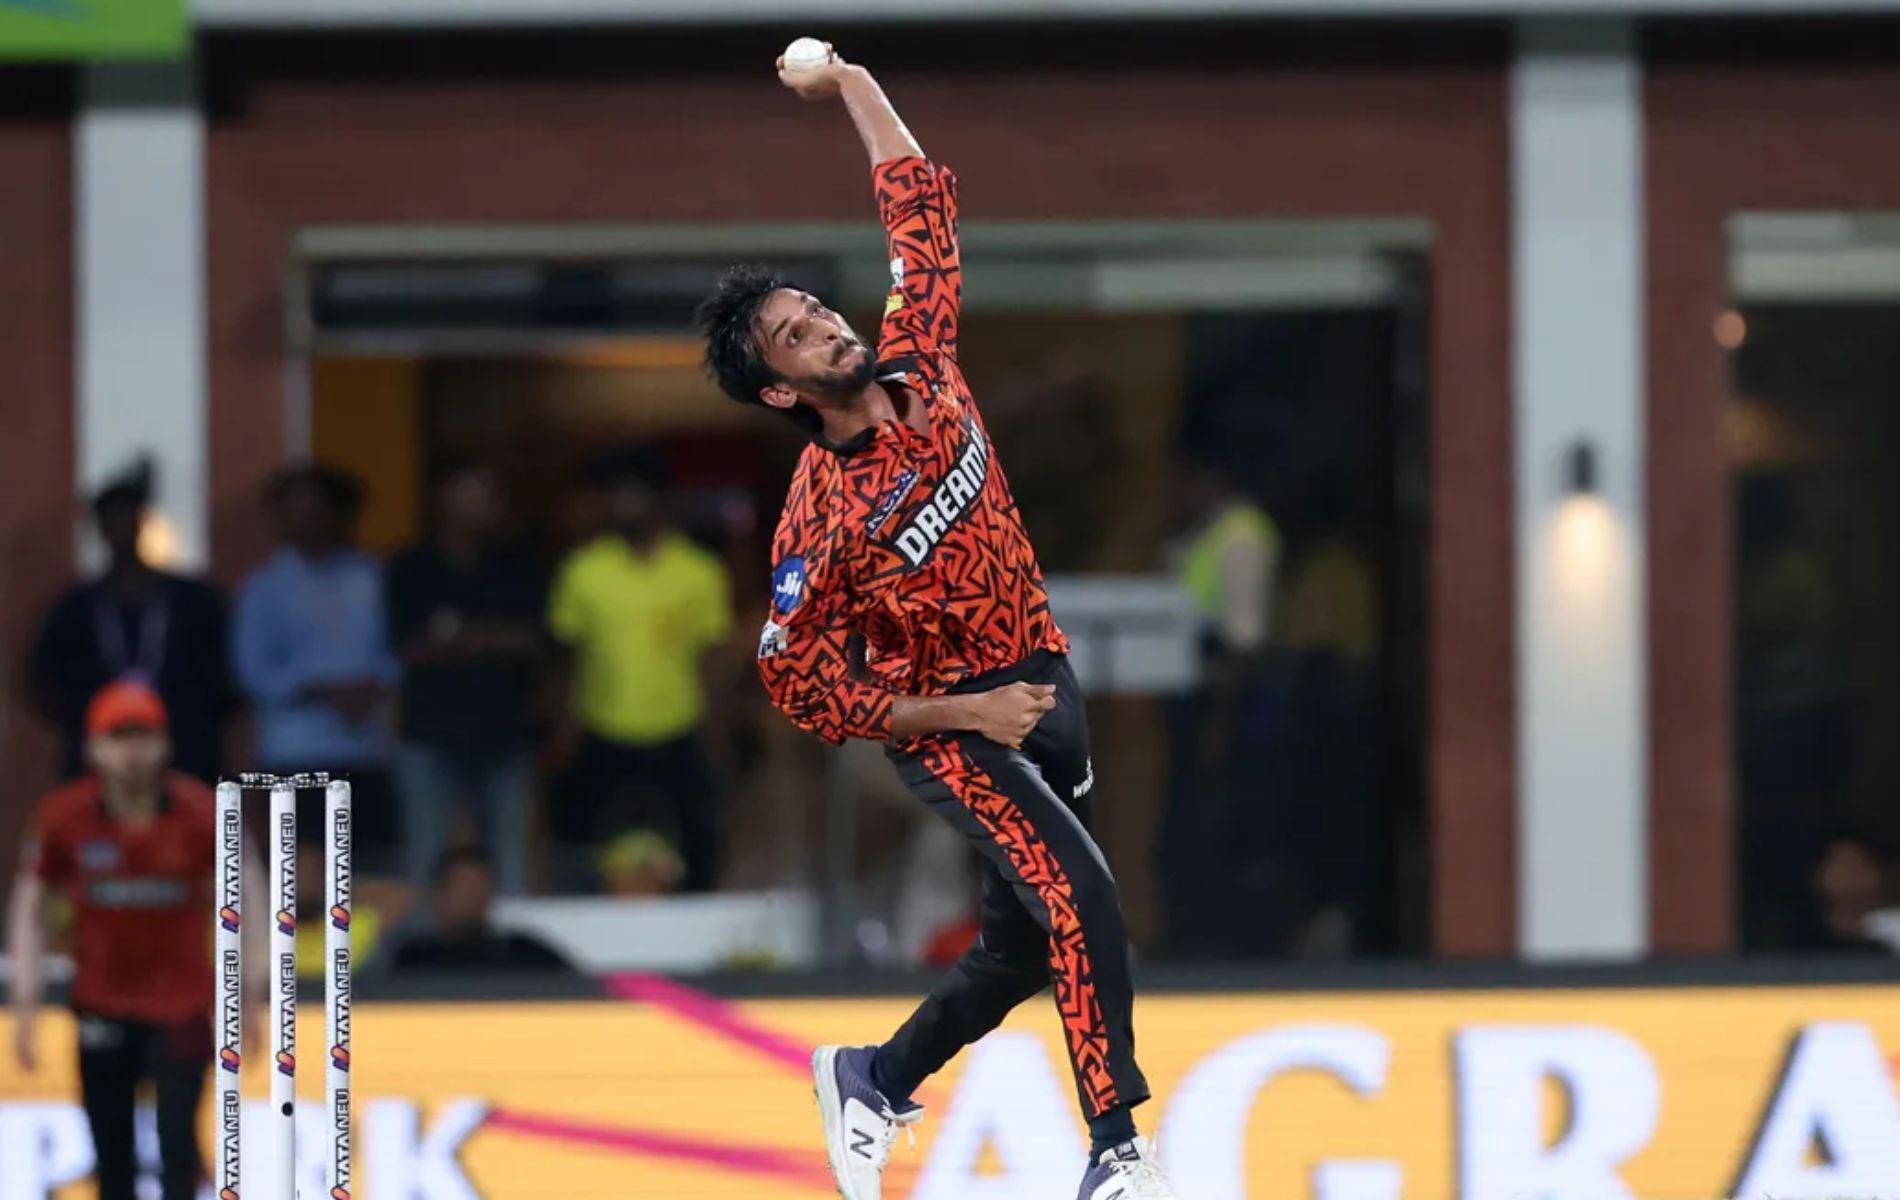 Shahbaz Ahmed in action. (Pic: IPLT20.com)